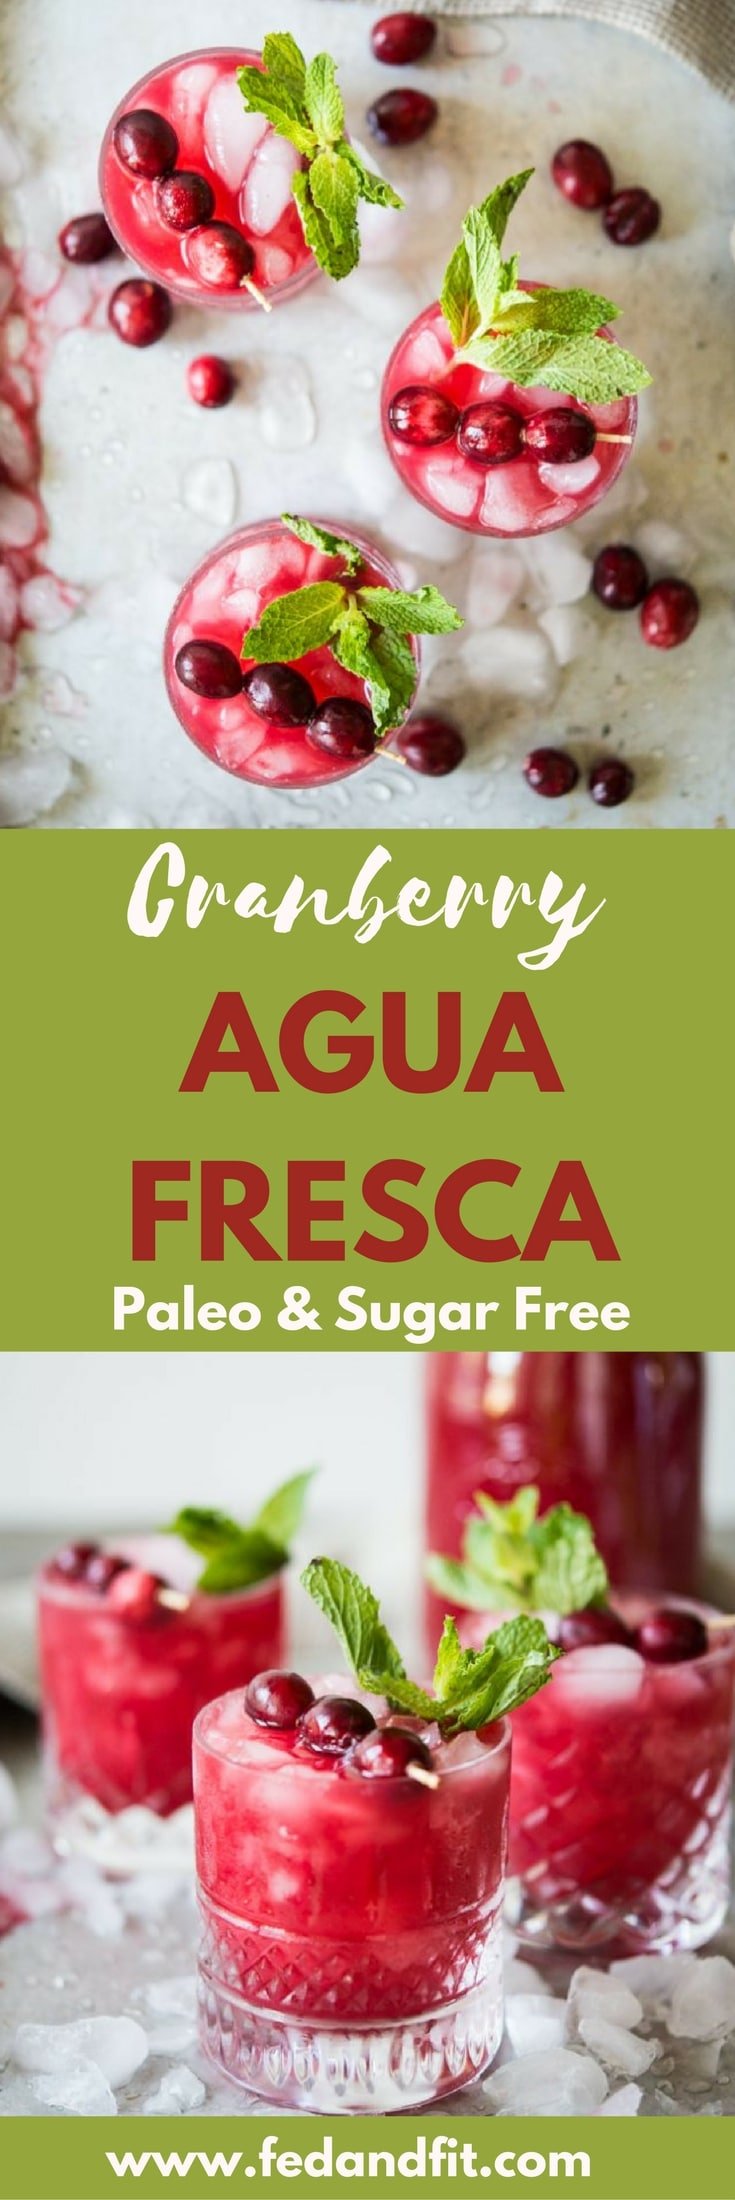 This cranberry agua fresca is made with fresh blended cranberries and can be made into a festive non-alcoholic drink, cranberry mimosas, or even a white winter sangria! 